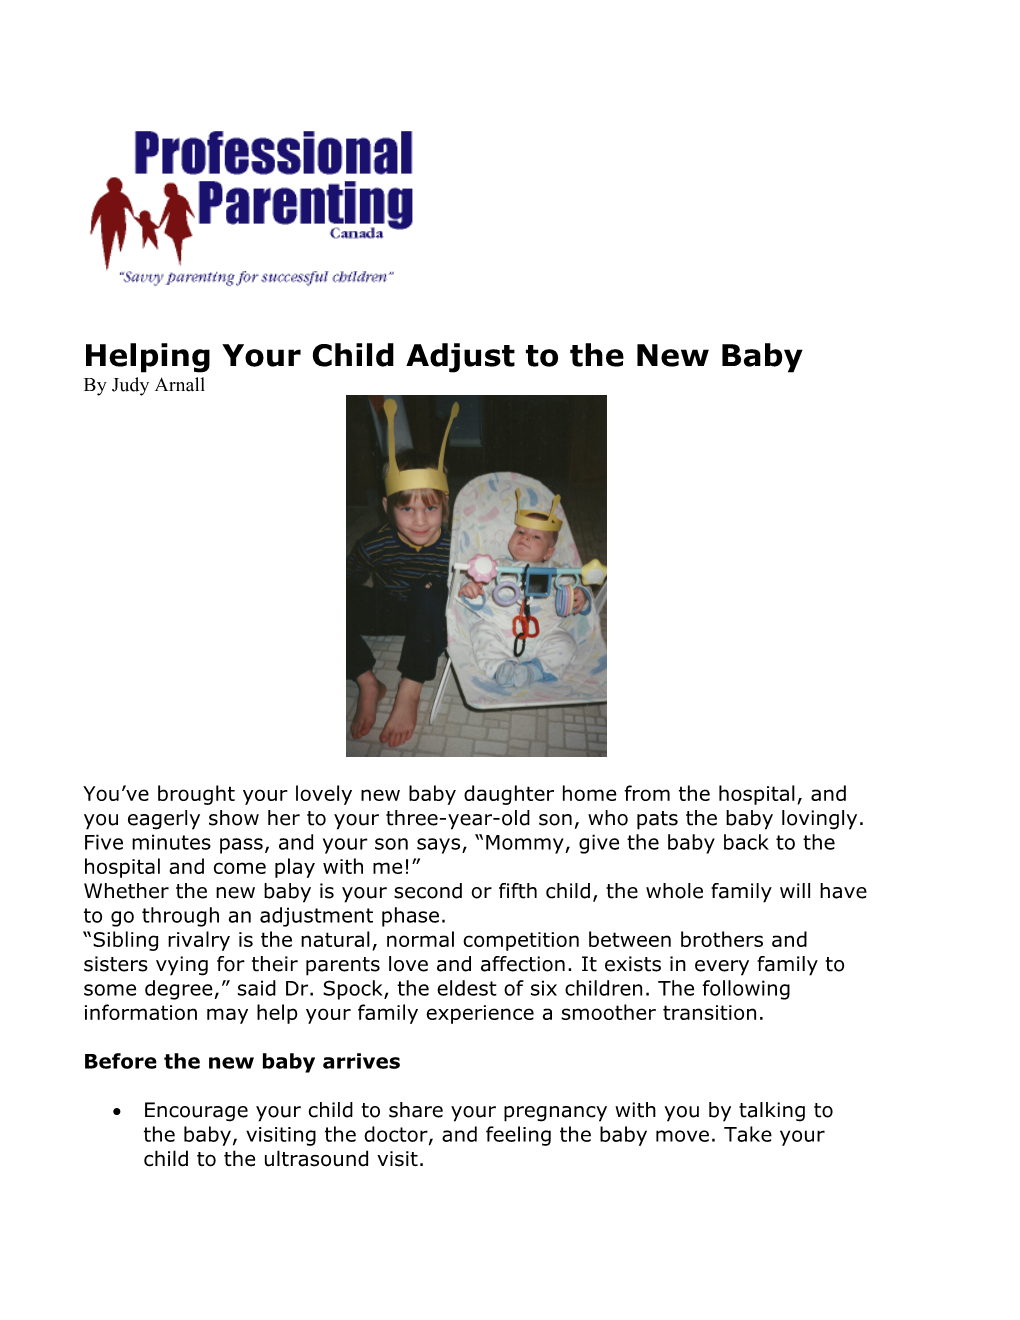 Helping Your Child Adjust to the New Baby